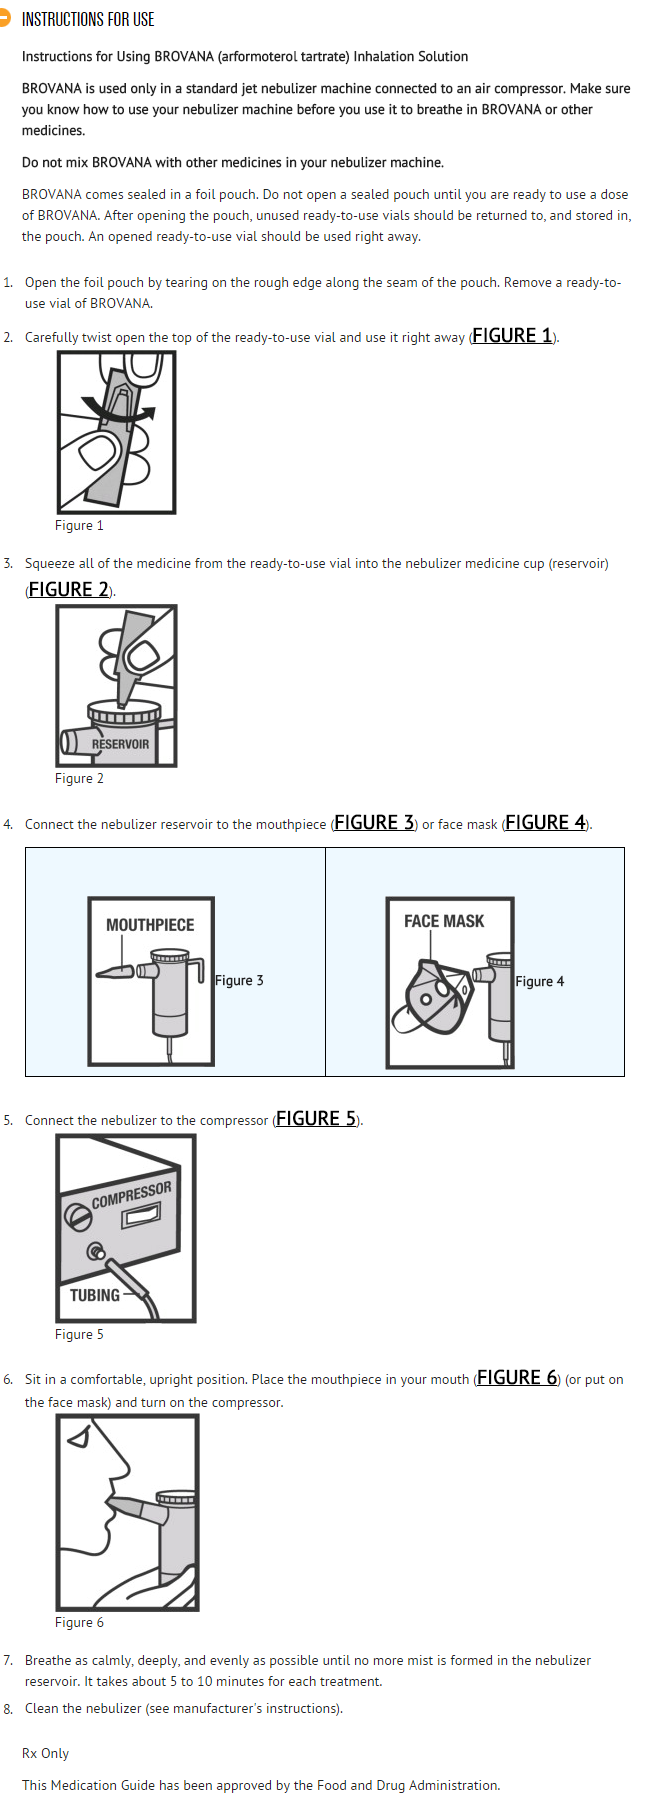 File:Instructions for use.png